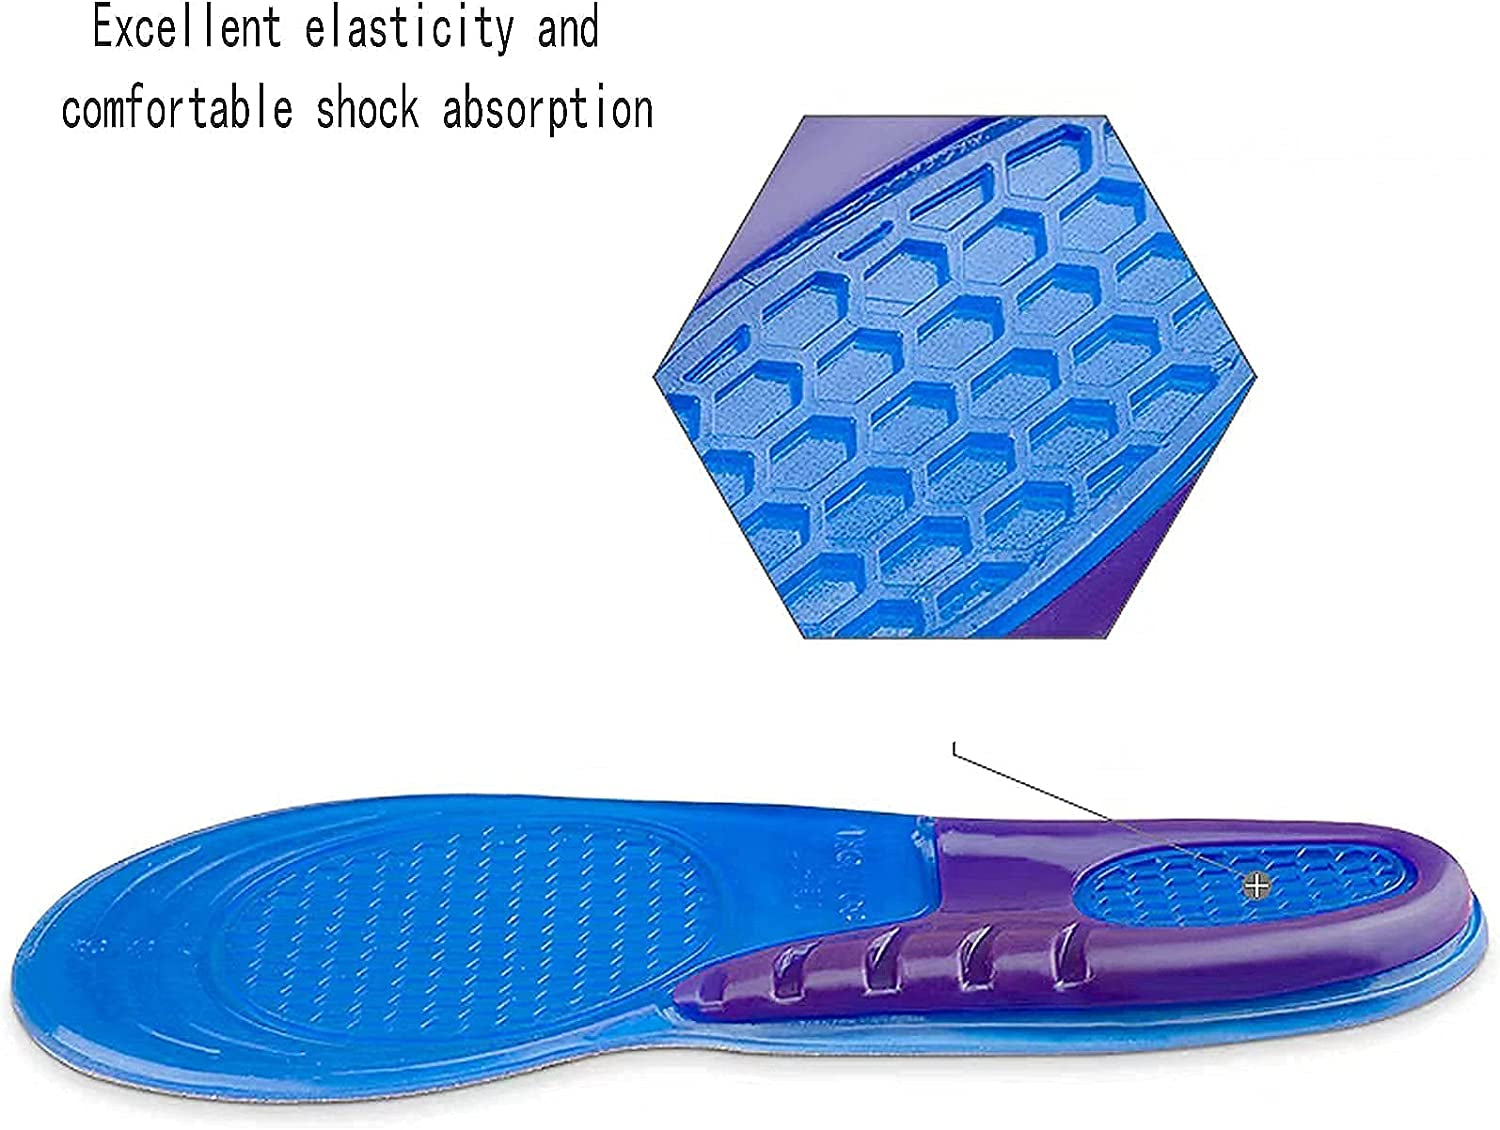 Gel Insoles All Day Comfort - Shoe Inserts Women - Full Length Orthotics - Cushion Soles for Heels, Arch Support, Plantar Fasciitis, Massaging Flat Feet